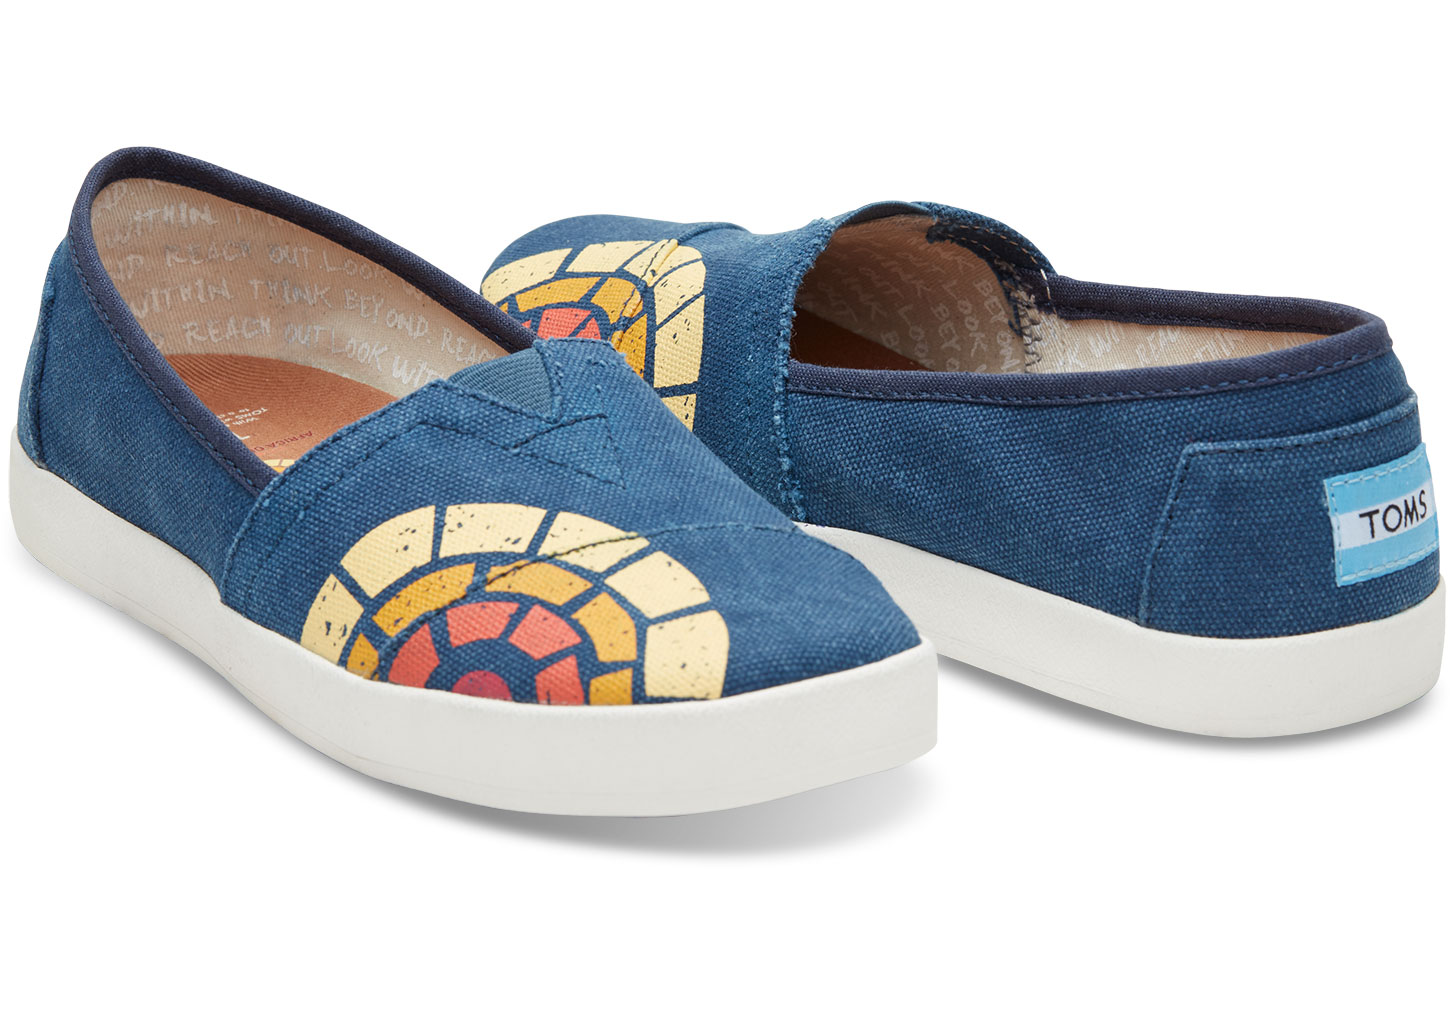 TOMS + CTAOP Women's Navy Washed Avalon Slip-Ons